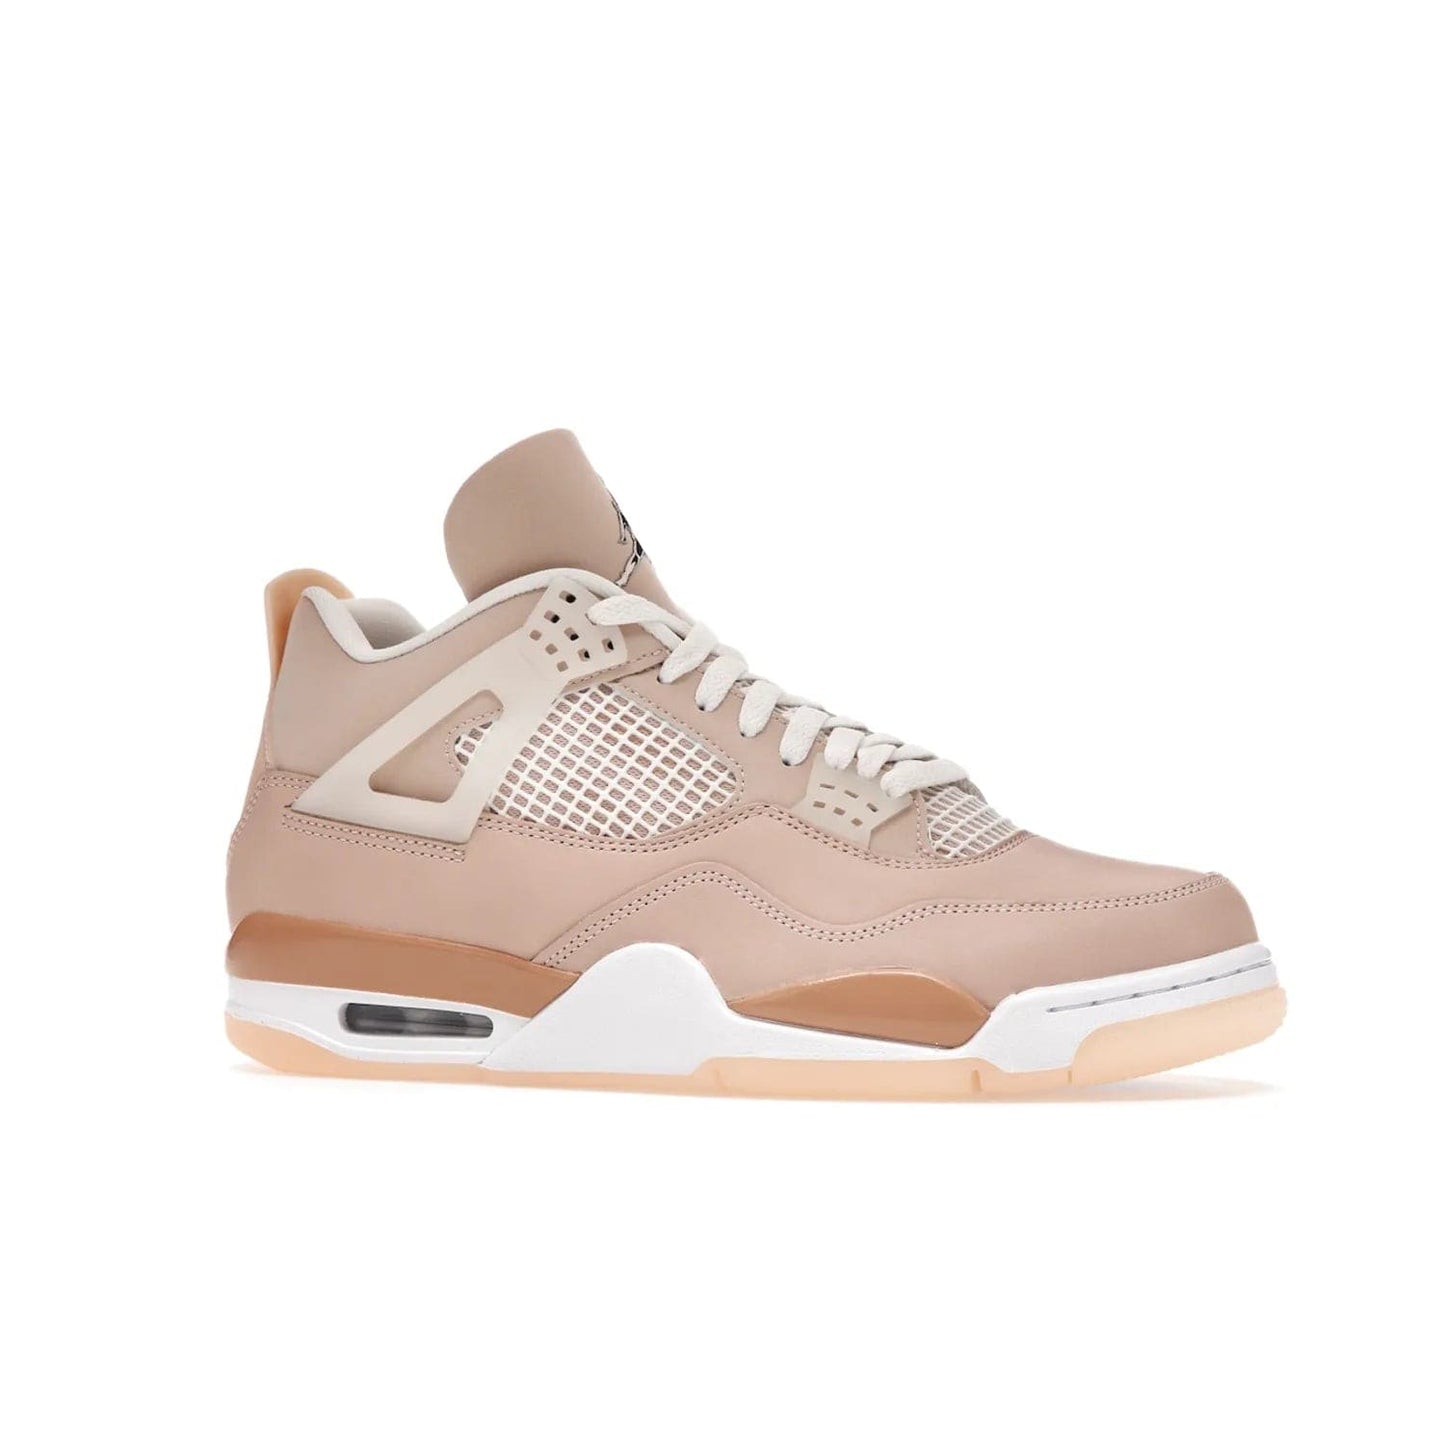 Jordan 4 Retro Shimmer (Women's) - Image 3 - Only at www.BallersClubKickz.com - Air Jordan 4 Shimmer (W): A women's-exclusive design with a buttery beige upper and Silver/Orange Bronze details. Durabuck and metallic Jumpman branding elevate the iconic silhouette. Shop now.